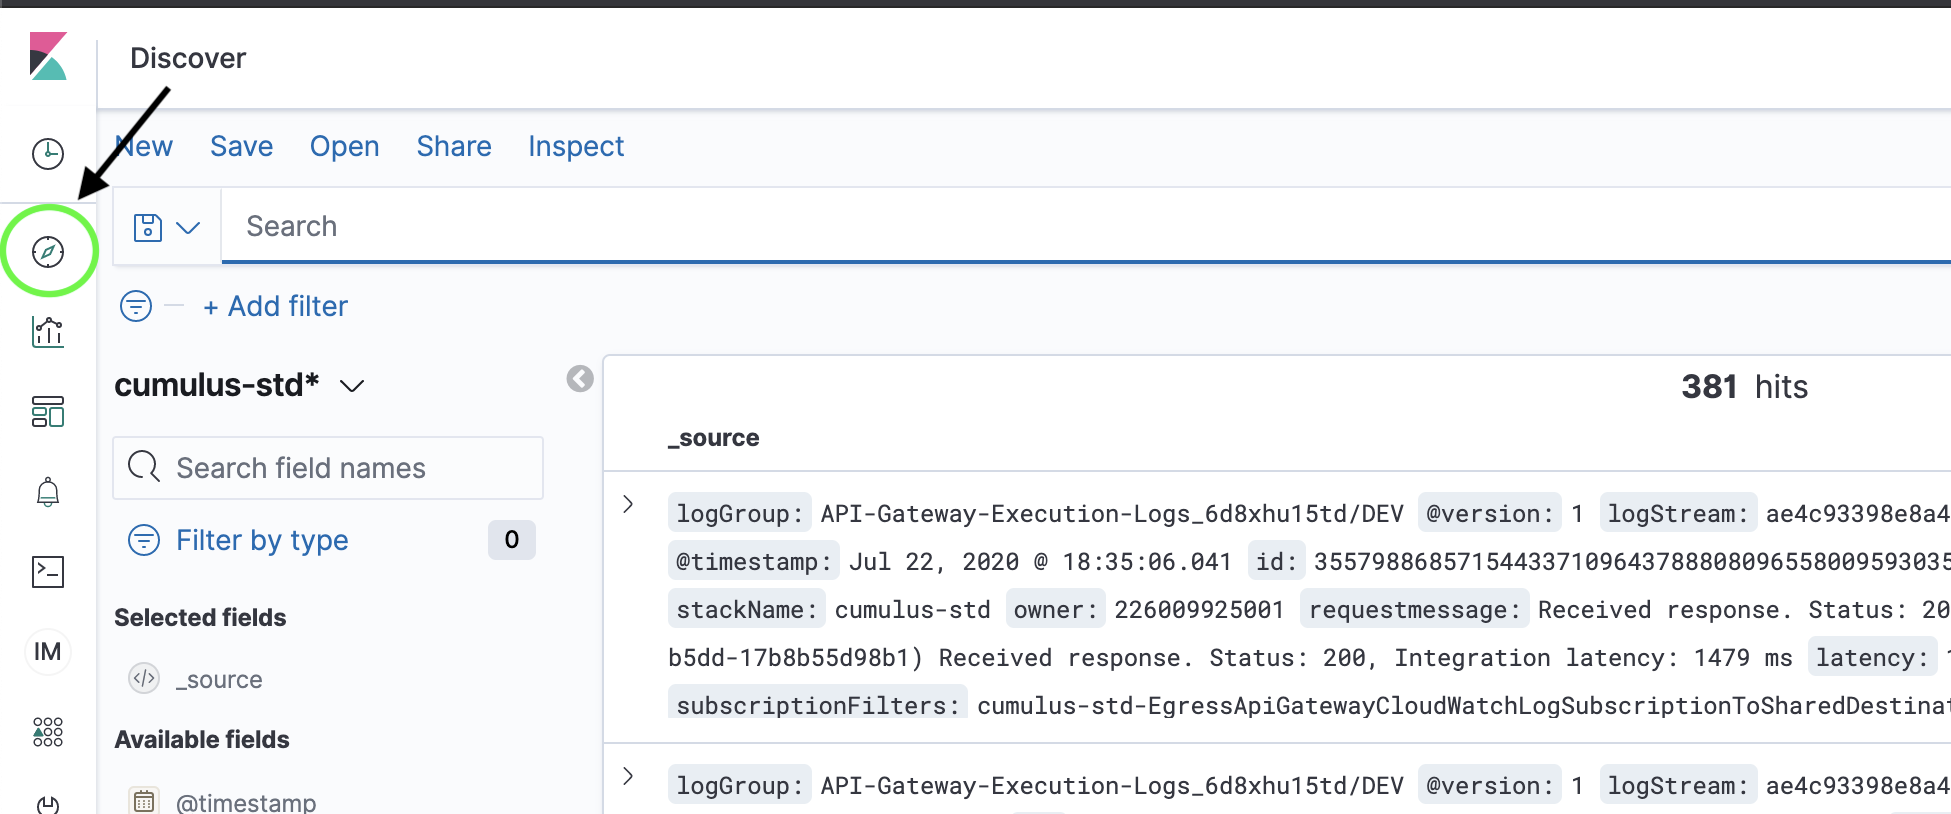 Screenshot of Kibana user interface showing the &quot;Discover&quot; page for running queries